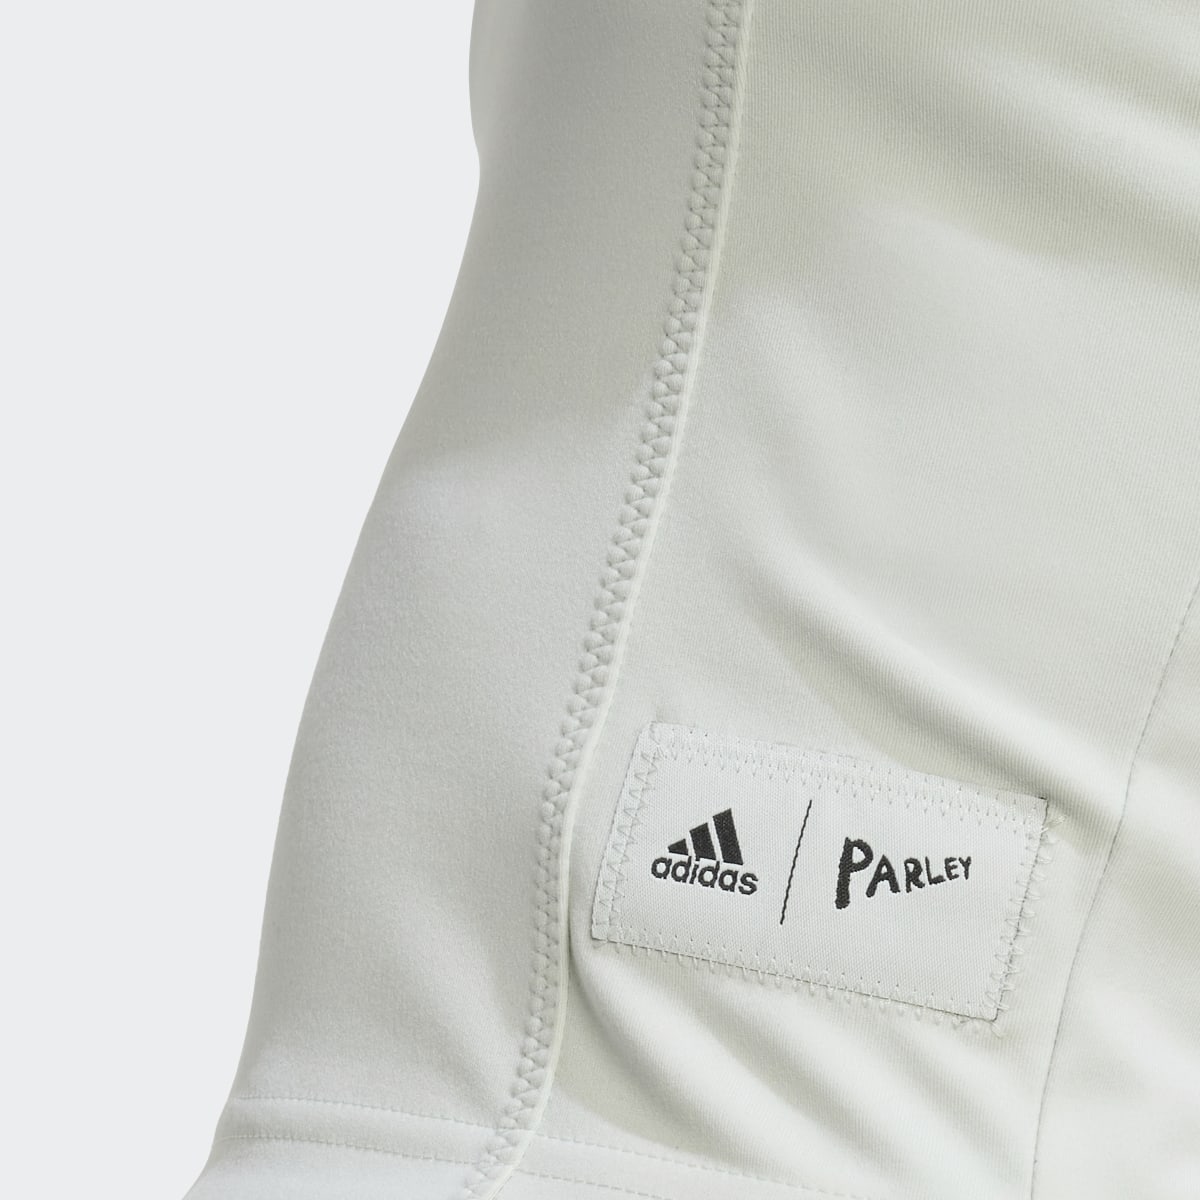 Adidas Parley Run for the Oceans Cropped Tanktop. 6